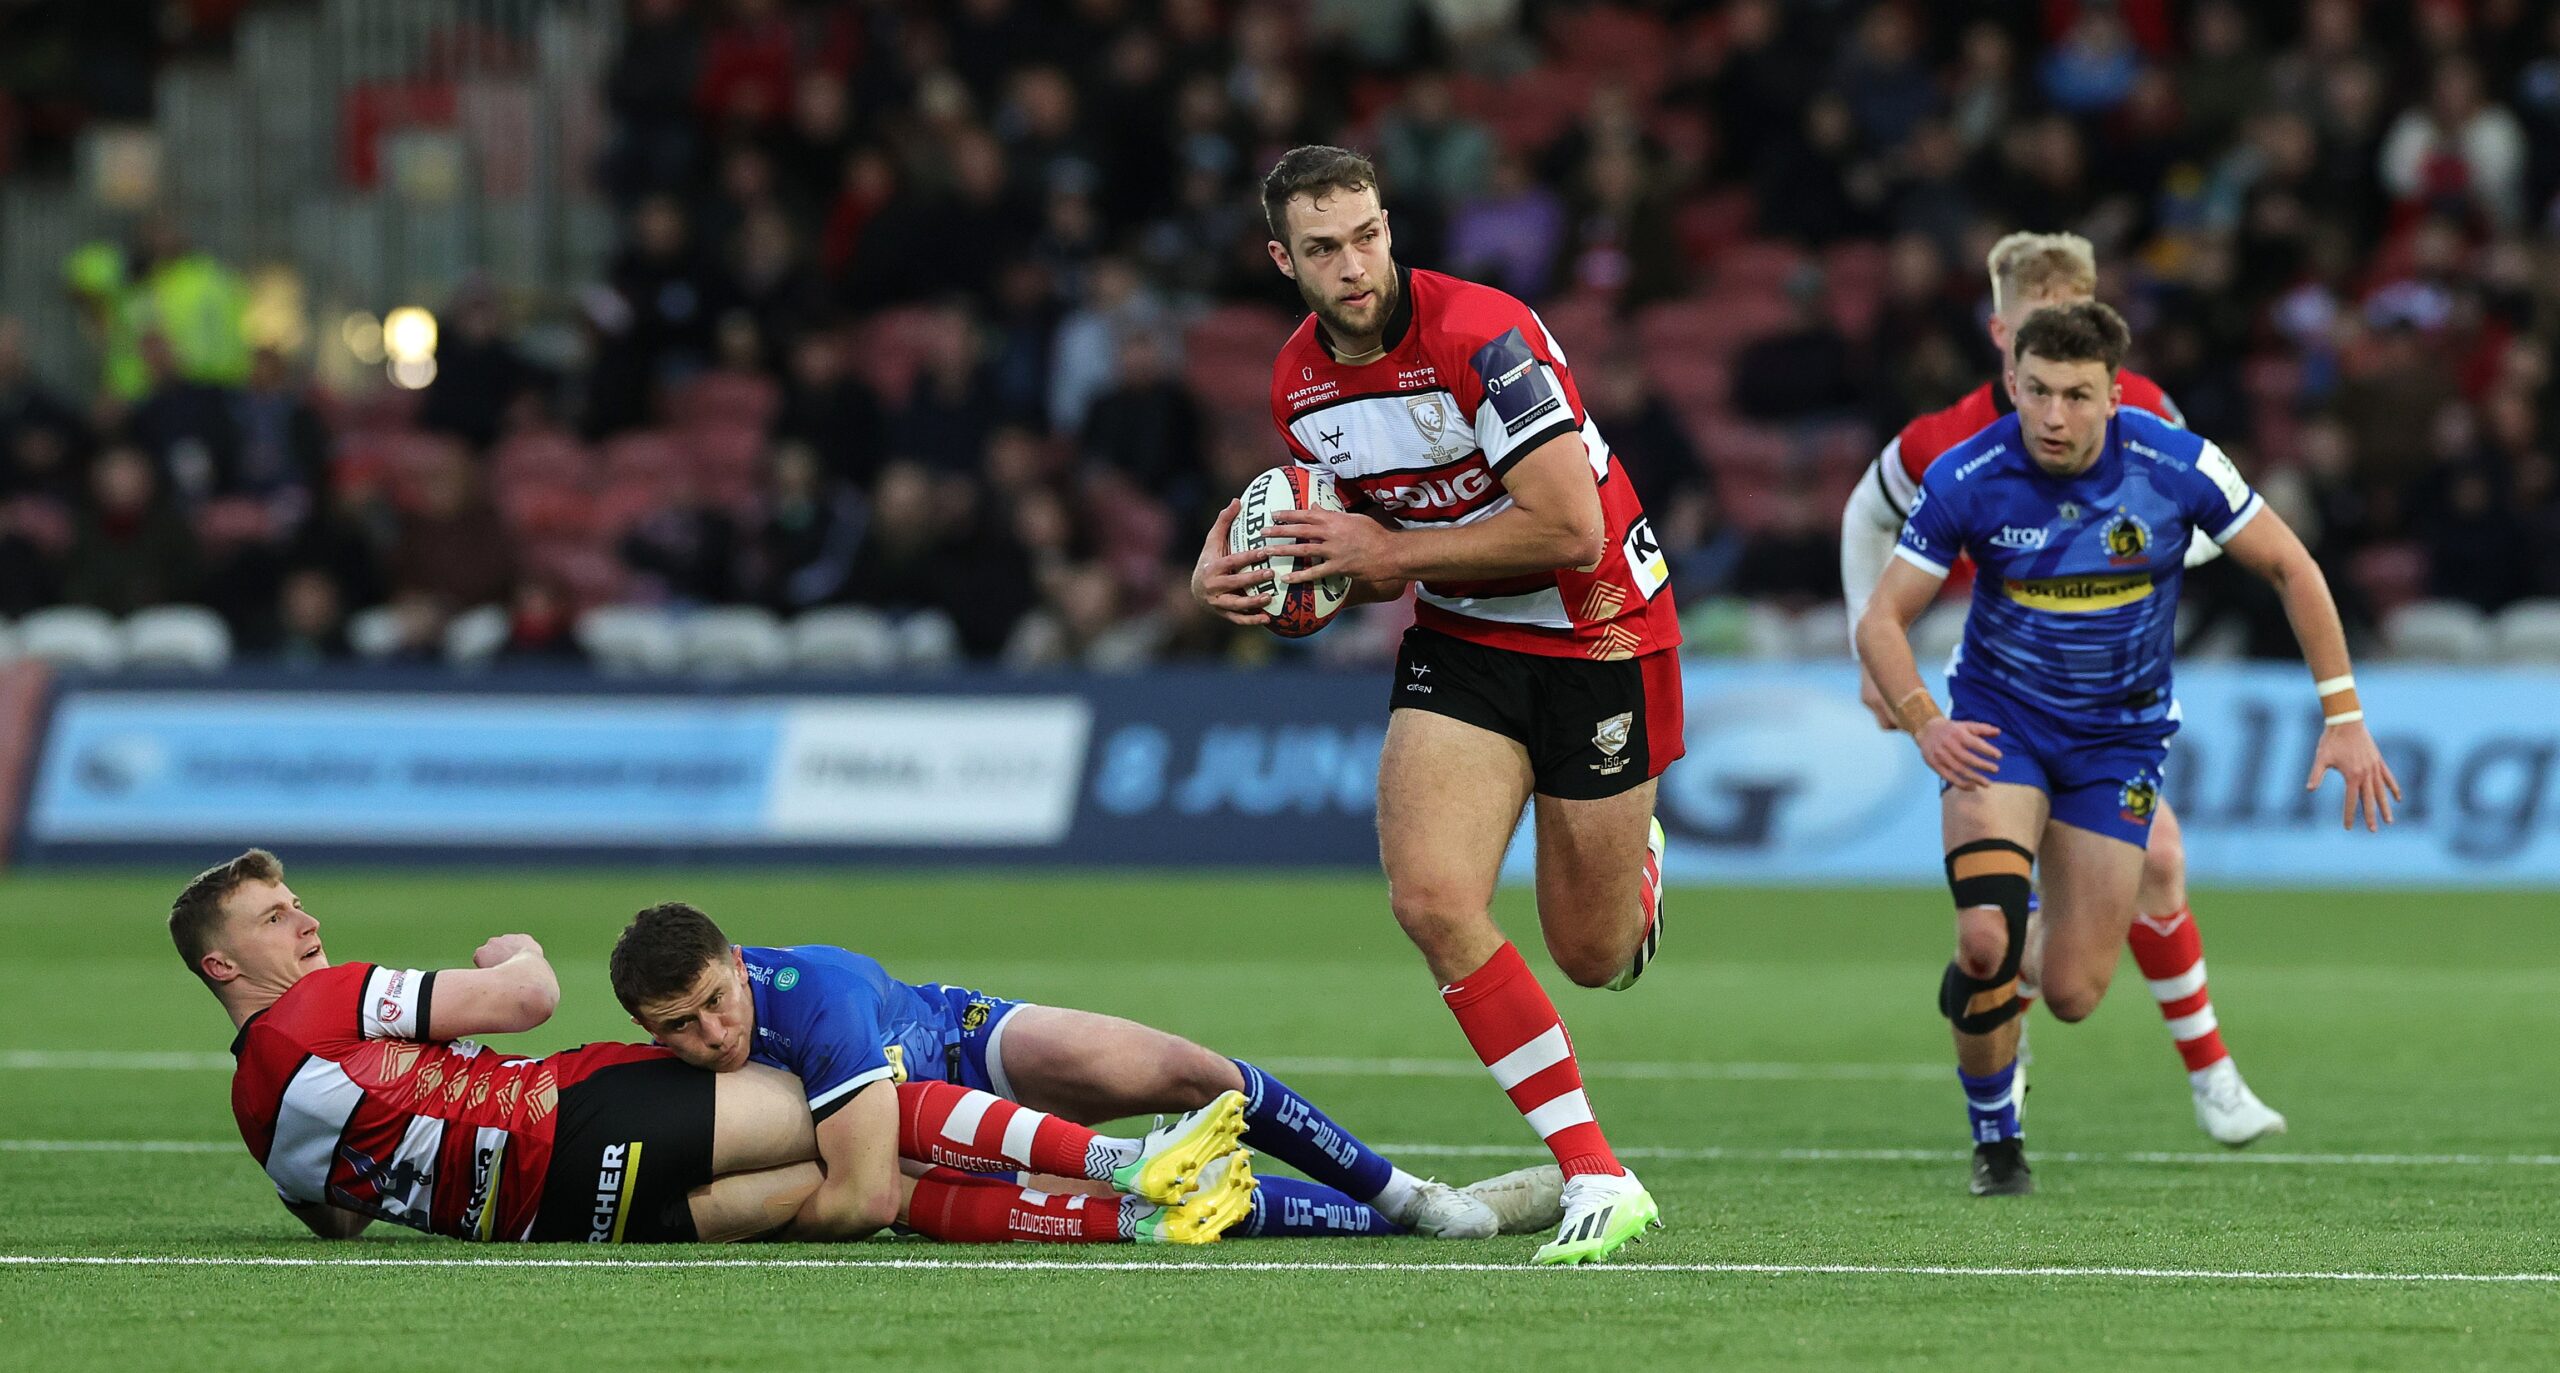 Max Llewellyn of Gloucester breaks with the ball